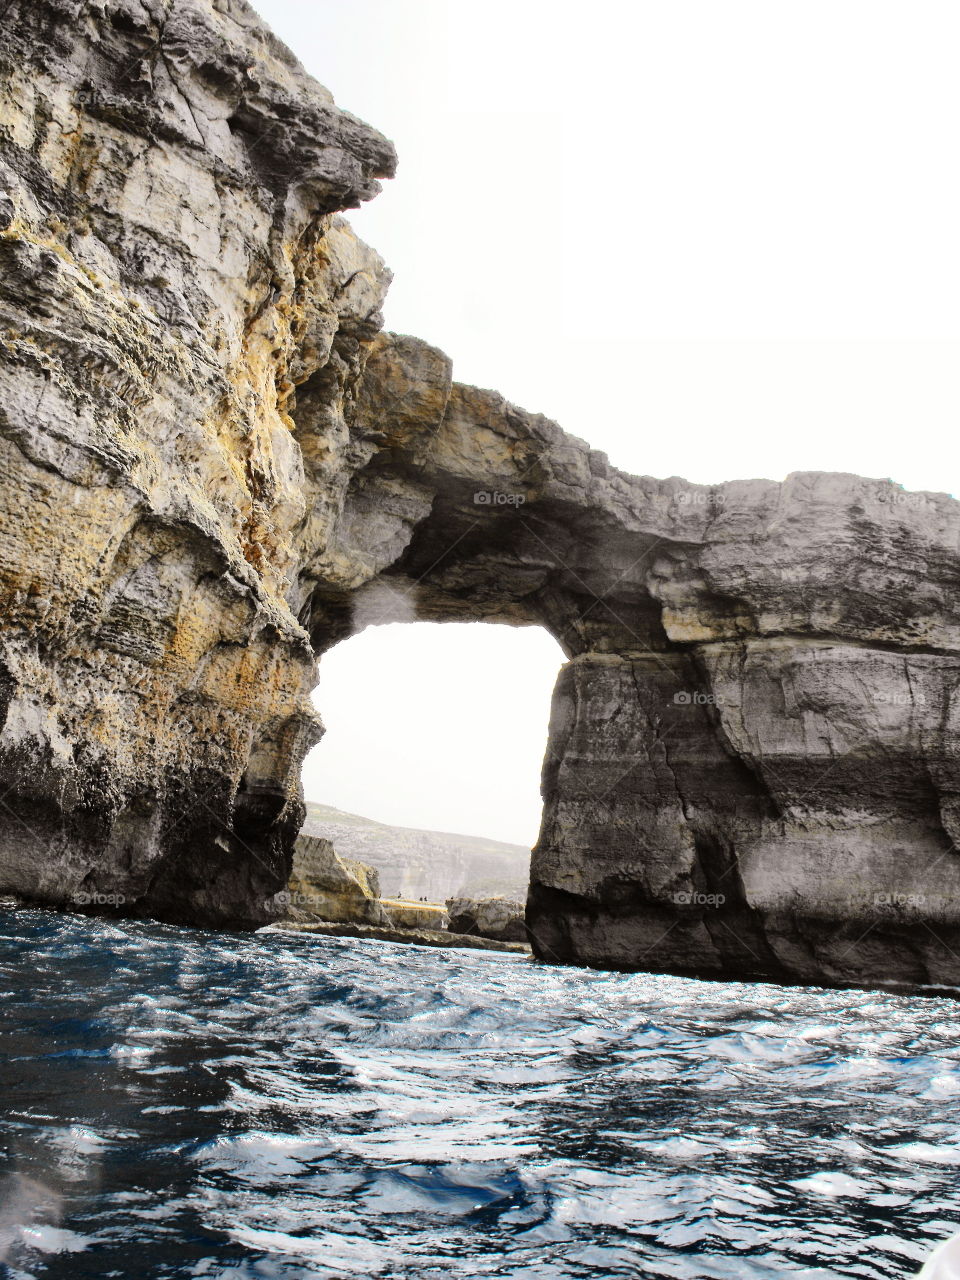 Azure Window, Malta, Gozo which is  sadly no more